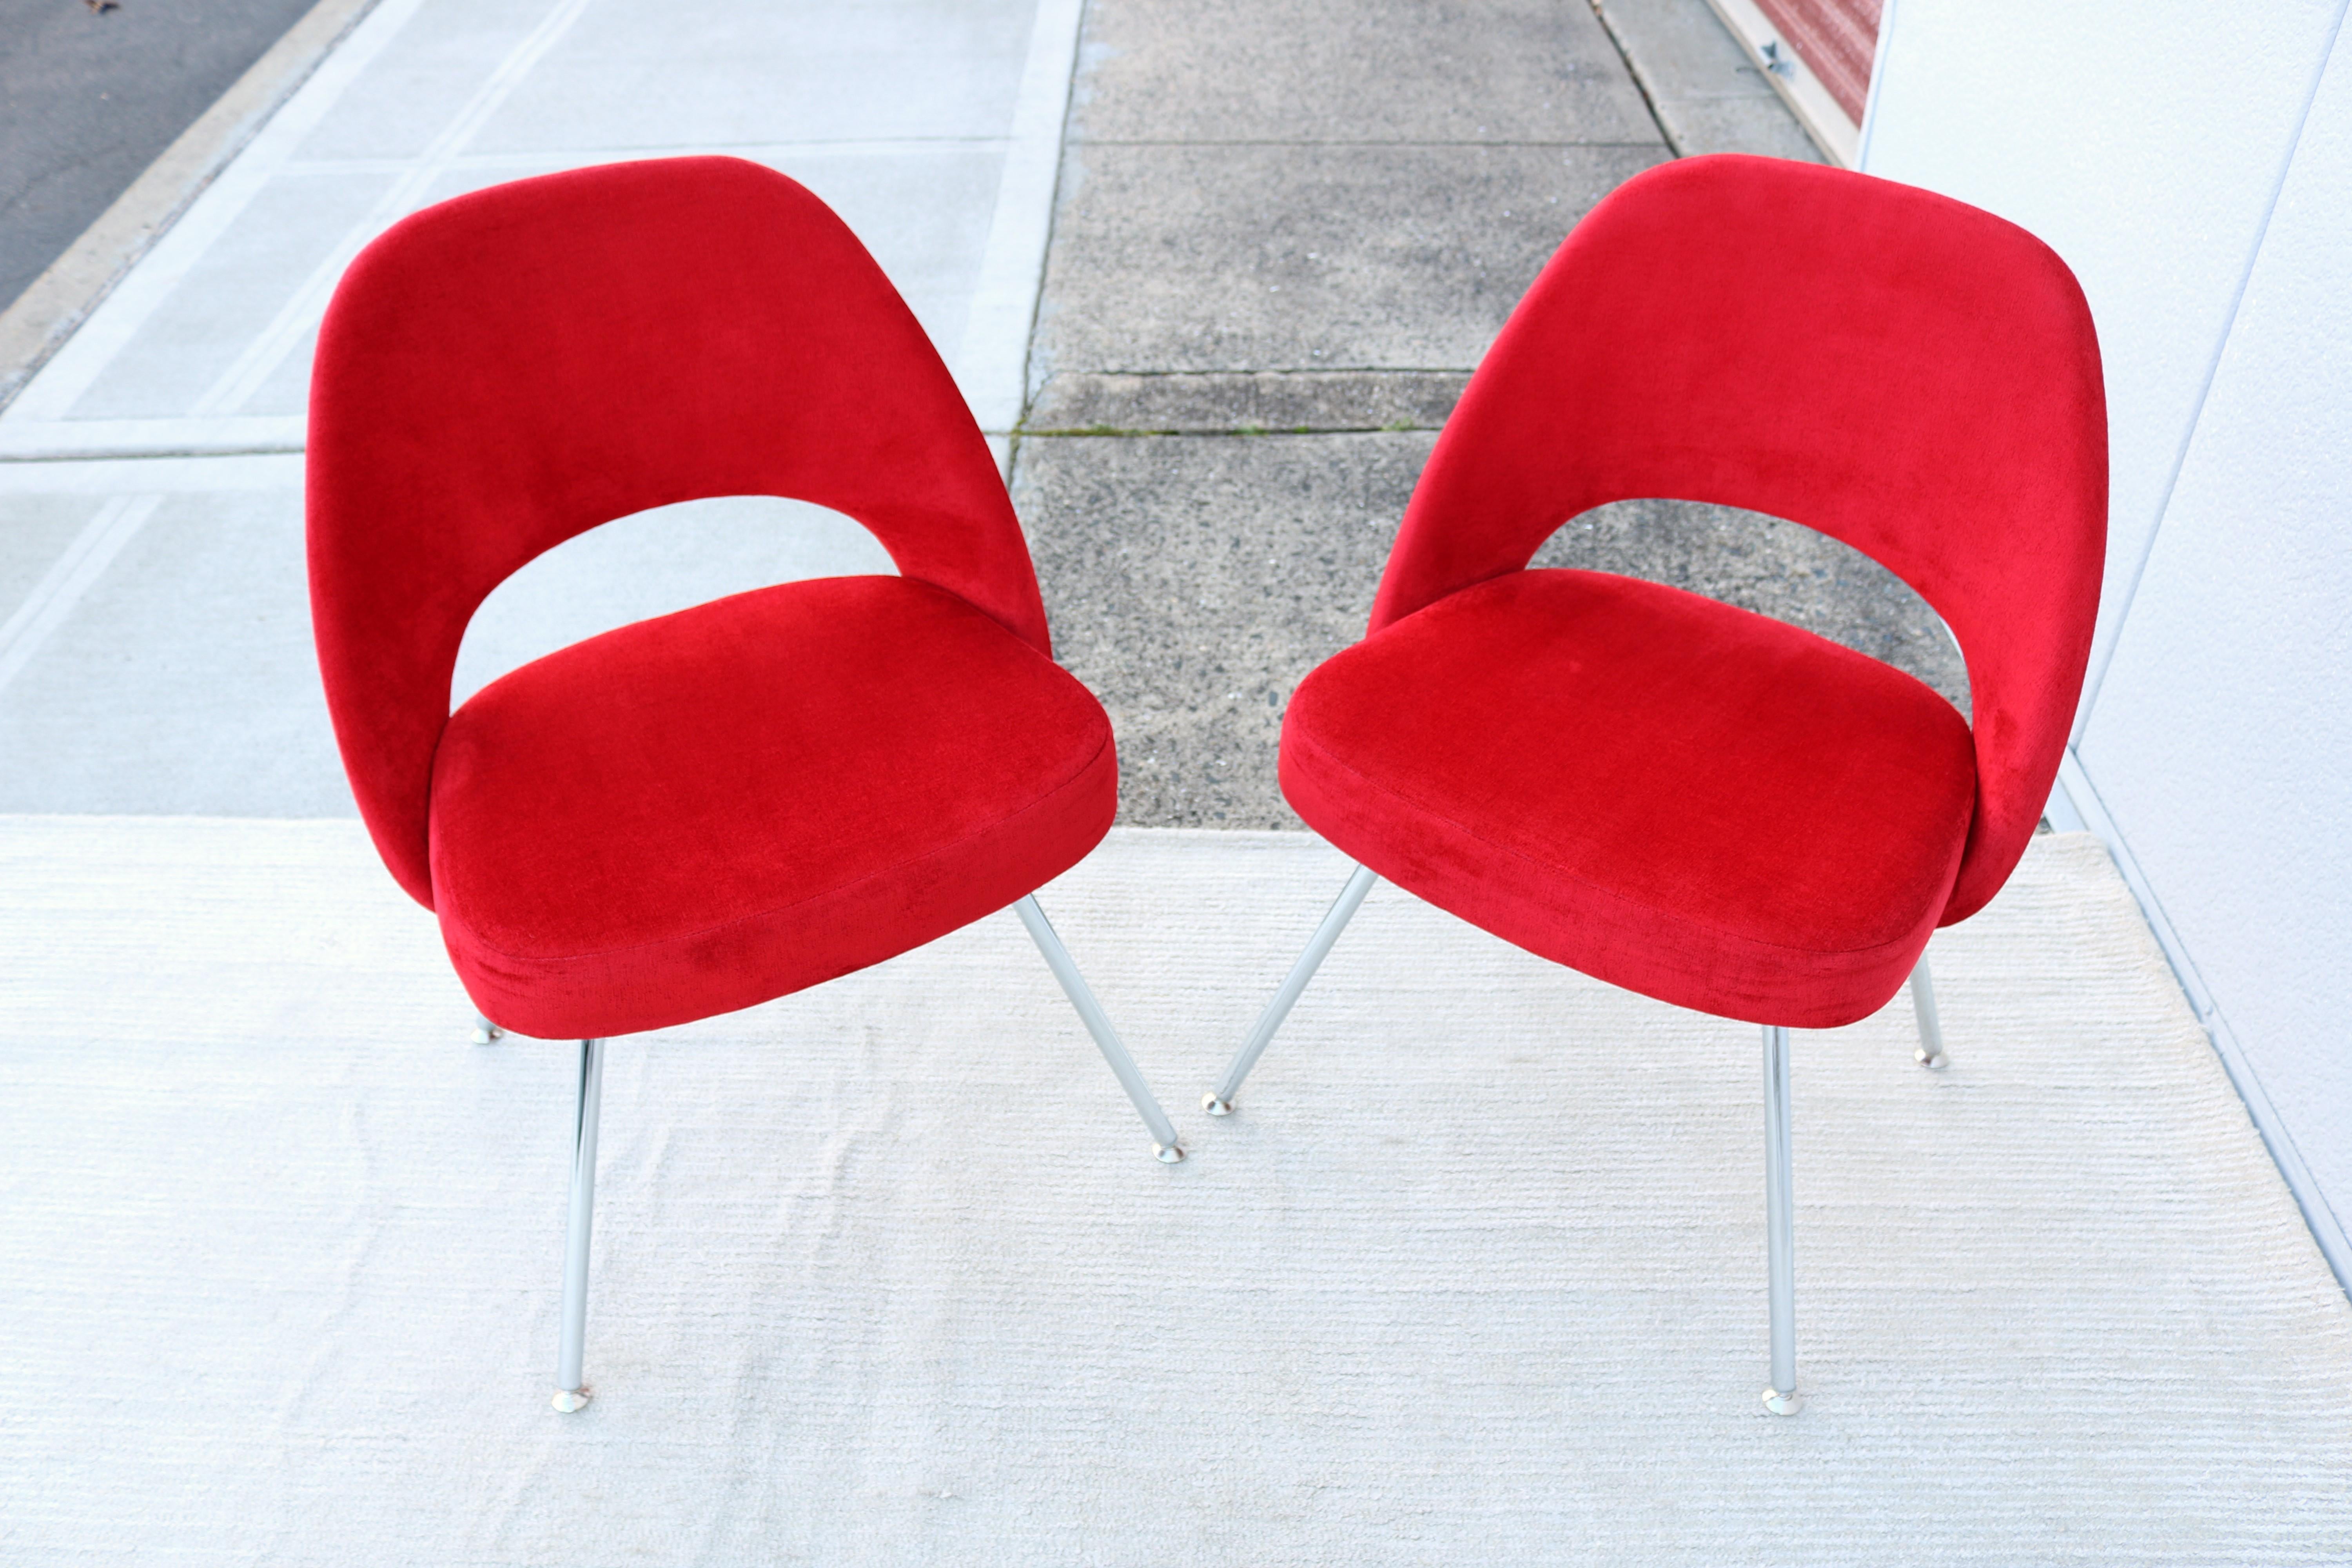 Mid-Century Modern Eero Saarinen for Knoll Red Executive Armless Chairs Set of 4 For Sale 6